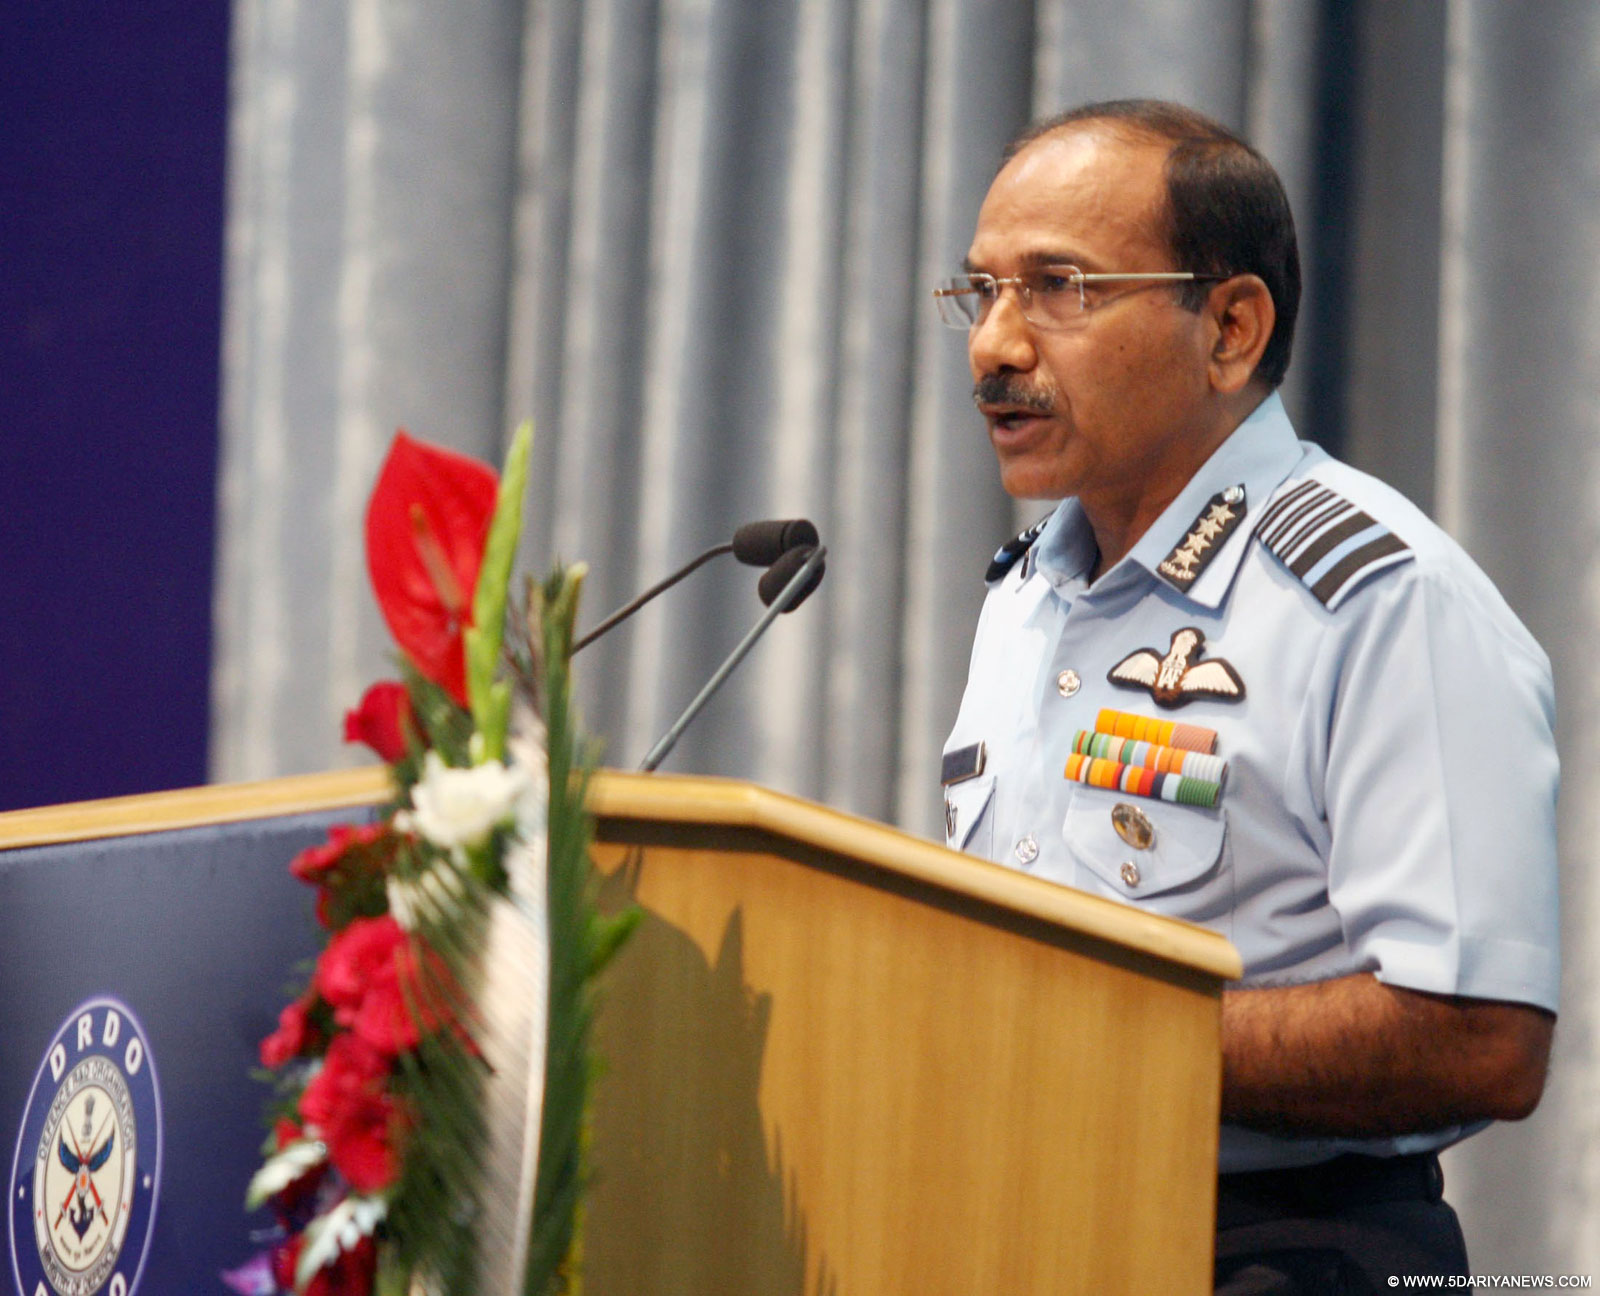 Women to be inducted as fighter pilots: IAF chief